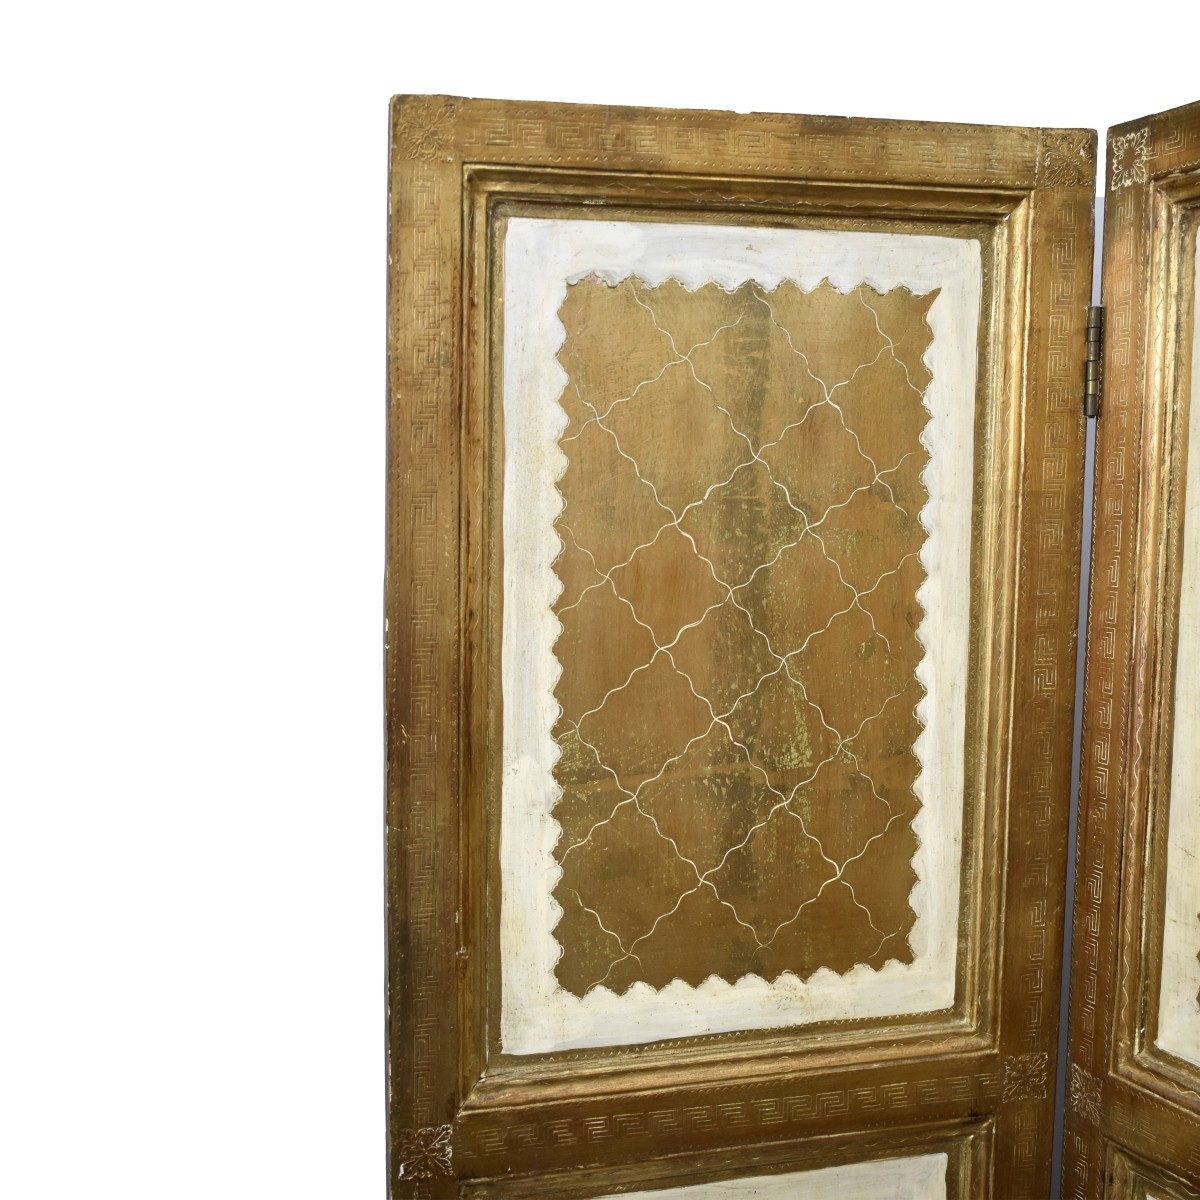 Mid 20th C. Neoclassical Style 3-Panel Screen